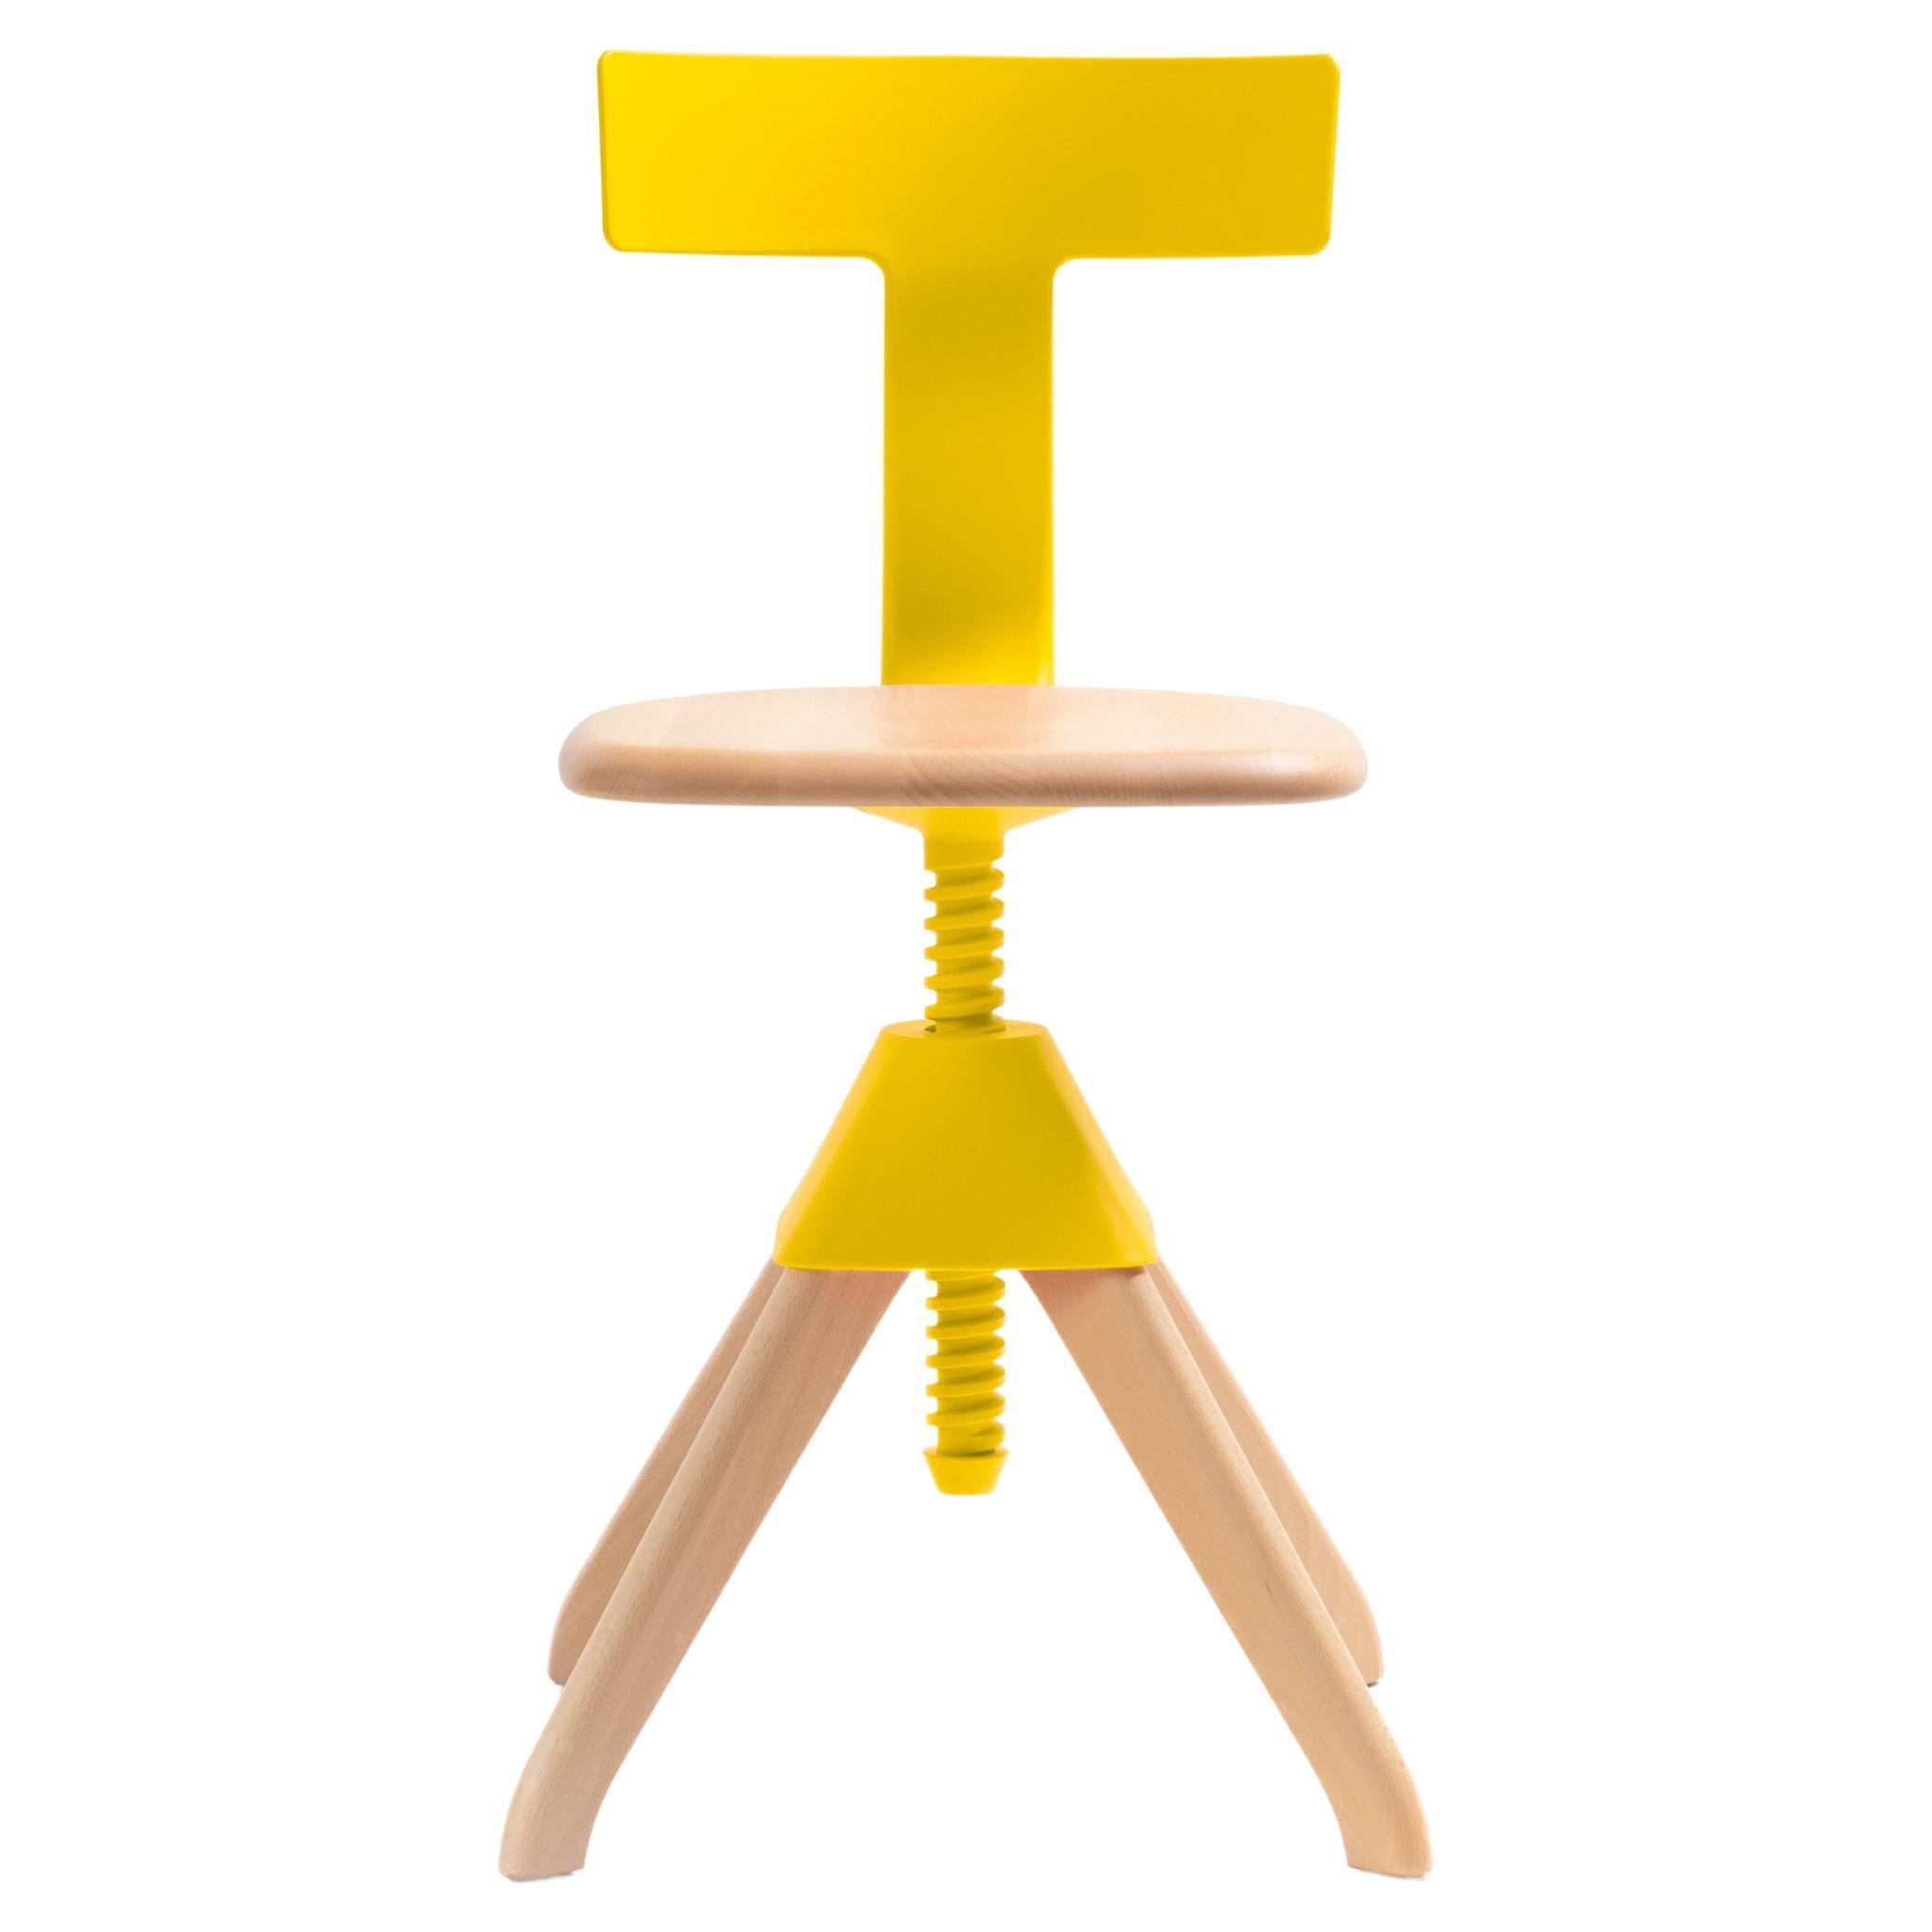 Tuffy by Konstantin Grcic for MAGIS